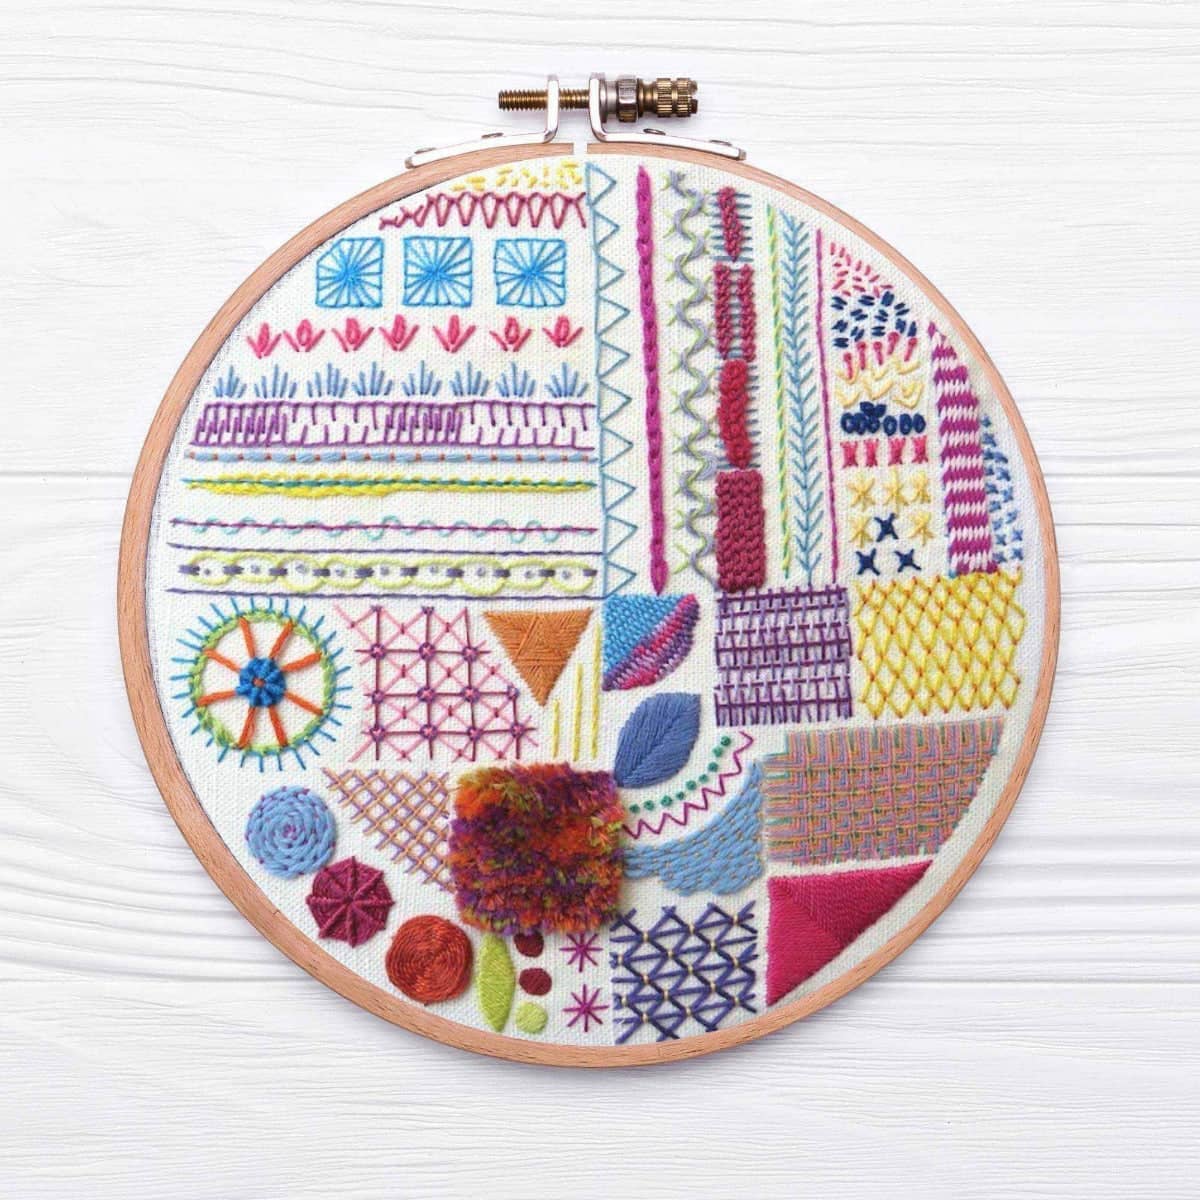 Hand embroidery Stitch Sampler with over 30 different stitches, Hand Embroidery Pattern , PDF Download , StitchDoodles , embroidery hoop kit, embroidery kits for adults, embroidery kits for beginners, hand embroidery, modern embroidery kits, PDF pattern, unique embroidery kits , StitchDoodles , shop.stitchdoodles.com